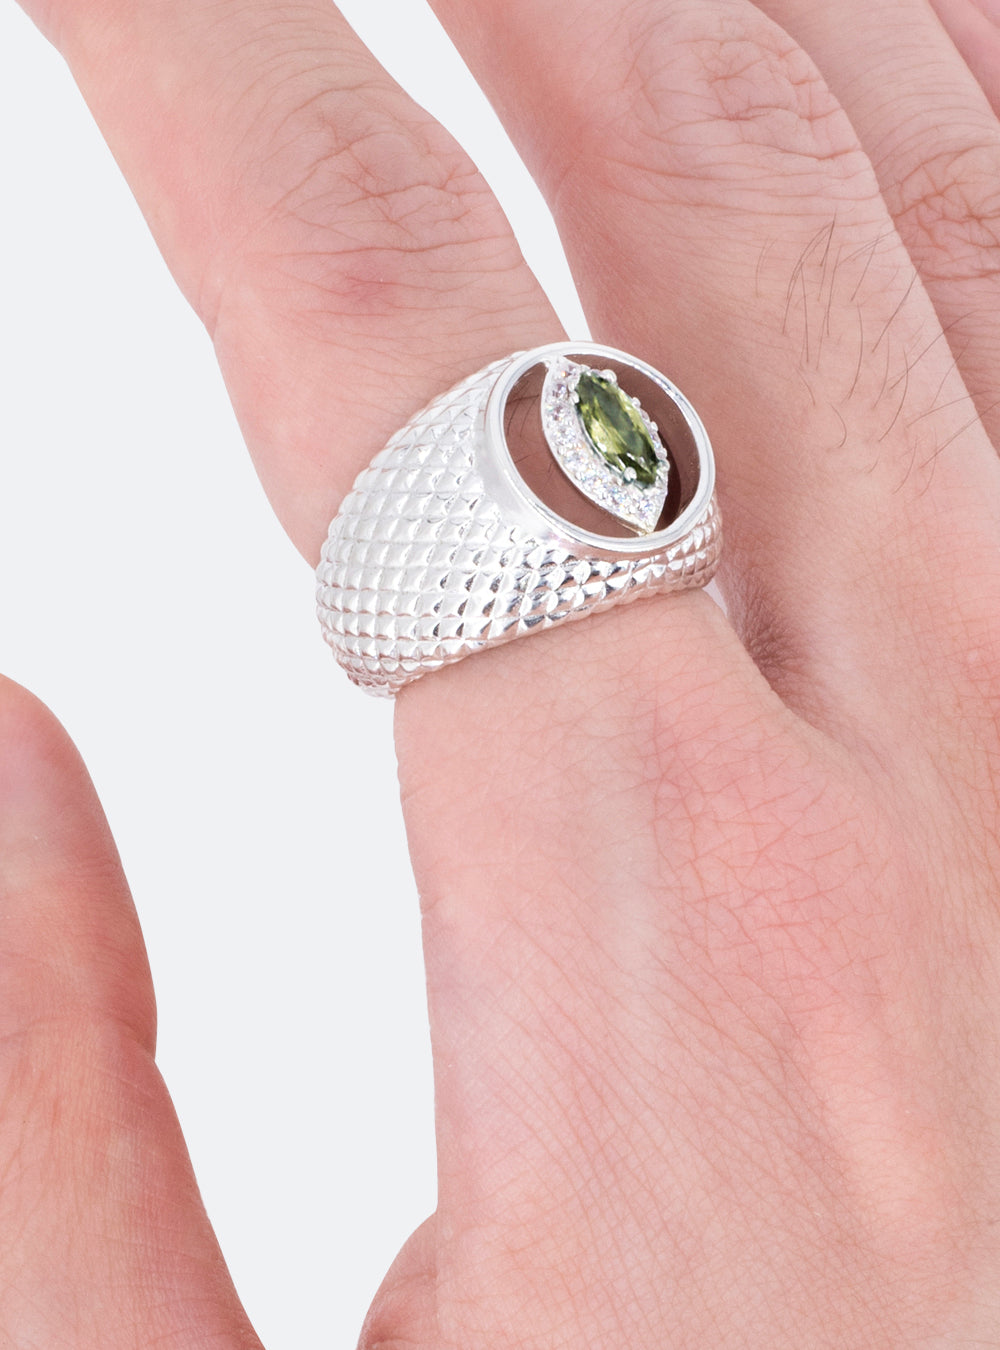 A man wearing a MIDNIGHTFACTORY cat-eye cutout cocktail signet ring with a green peridot stone.